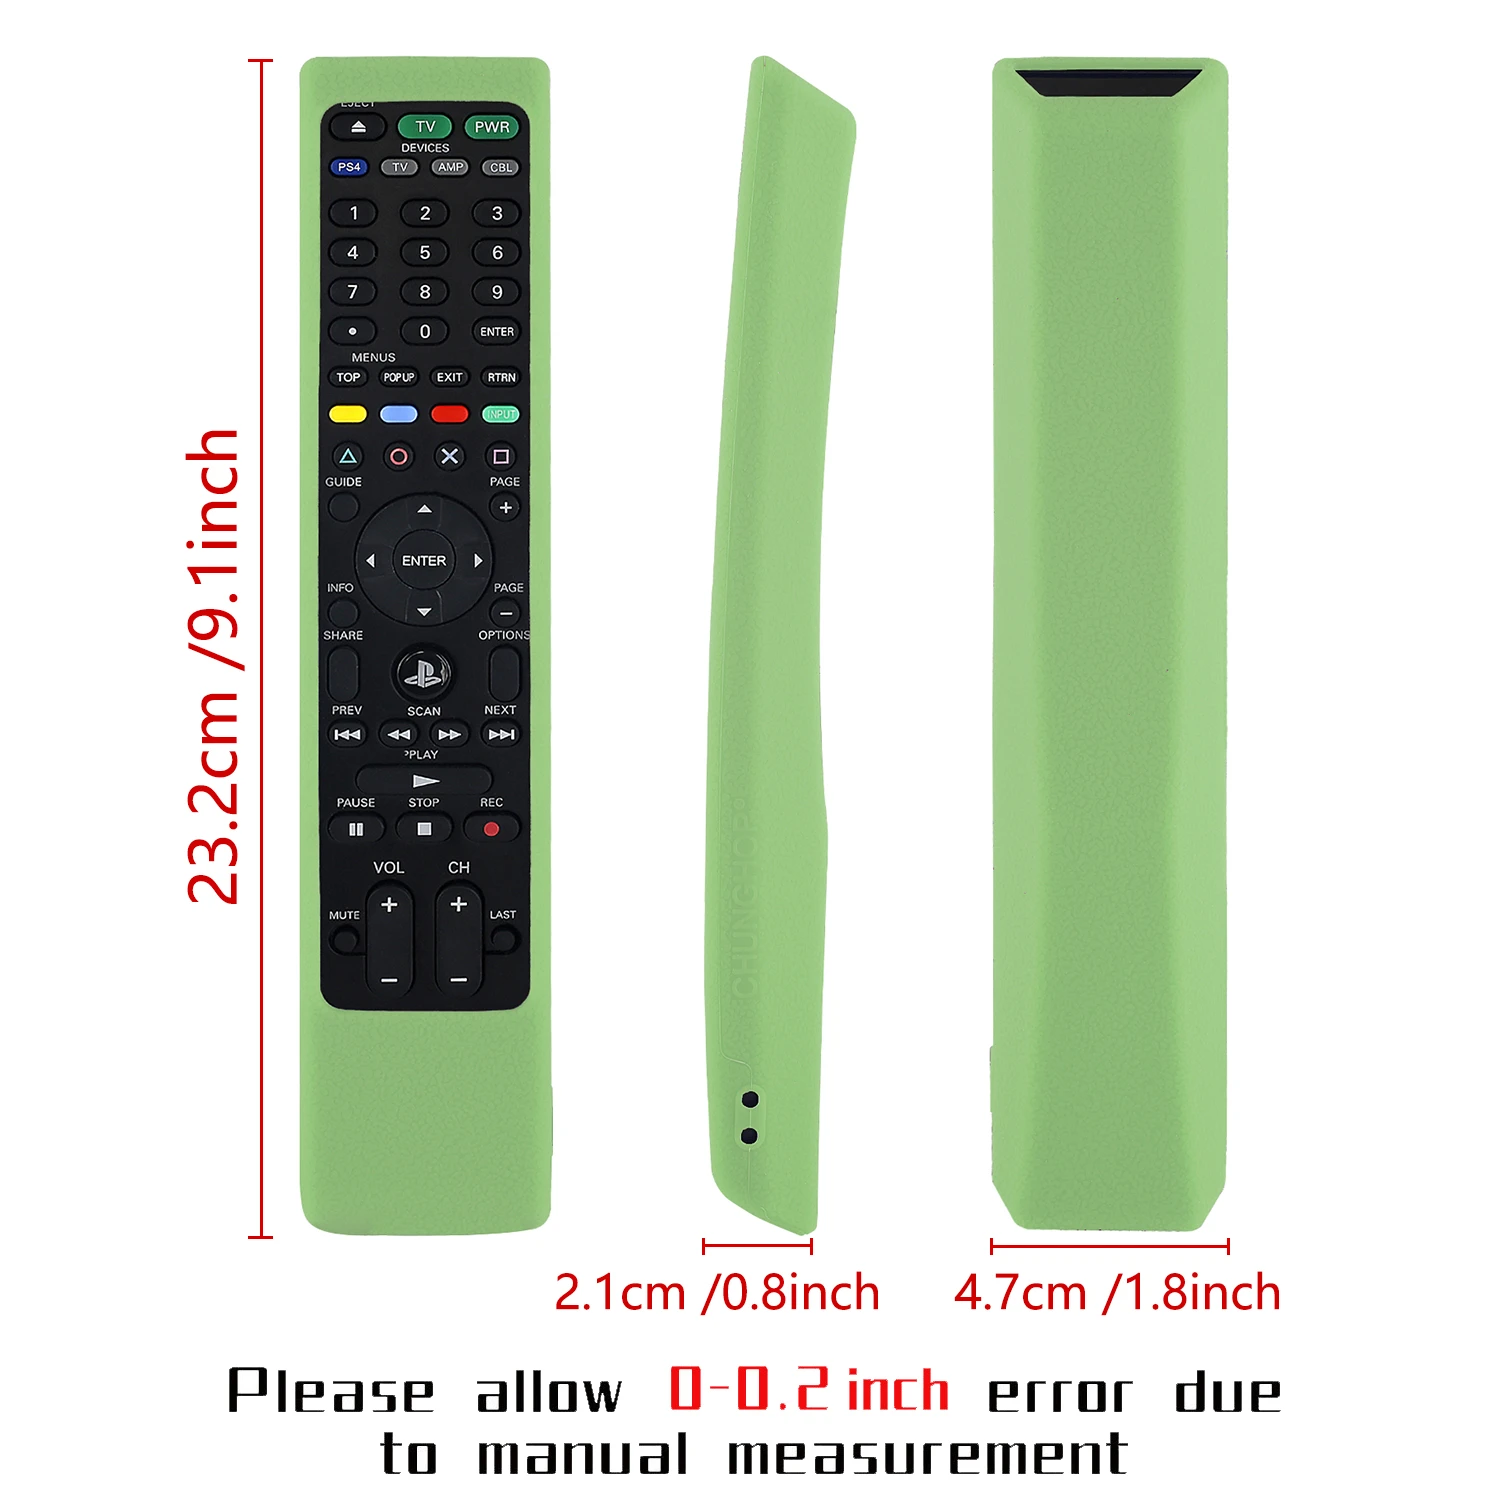 Allerede Natura fange Universal Media Remote Ps4 | Play Station Remote Cover Ps4 | Pdp Media  Remote Ps4 - Remote Control - Aliexpress